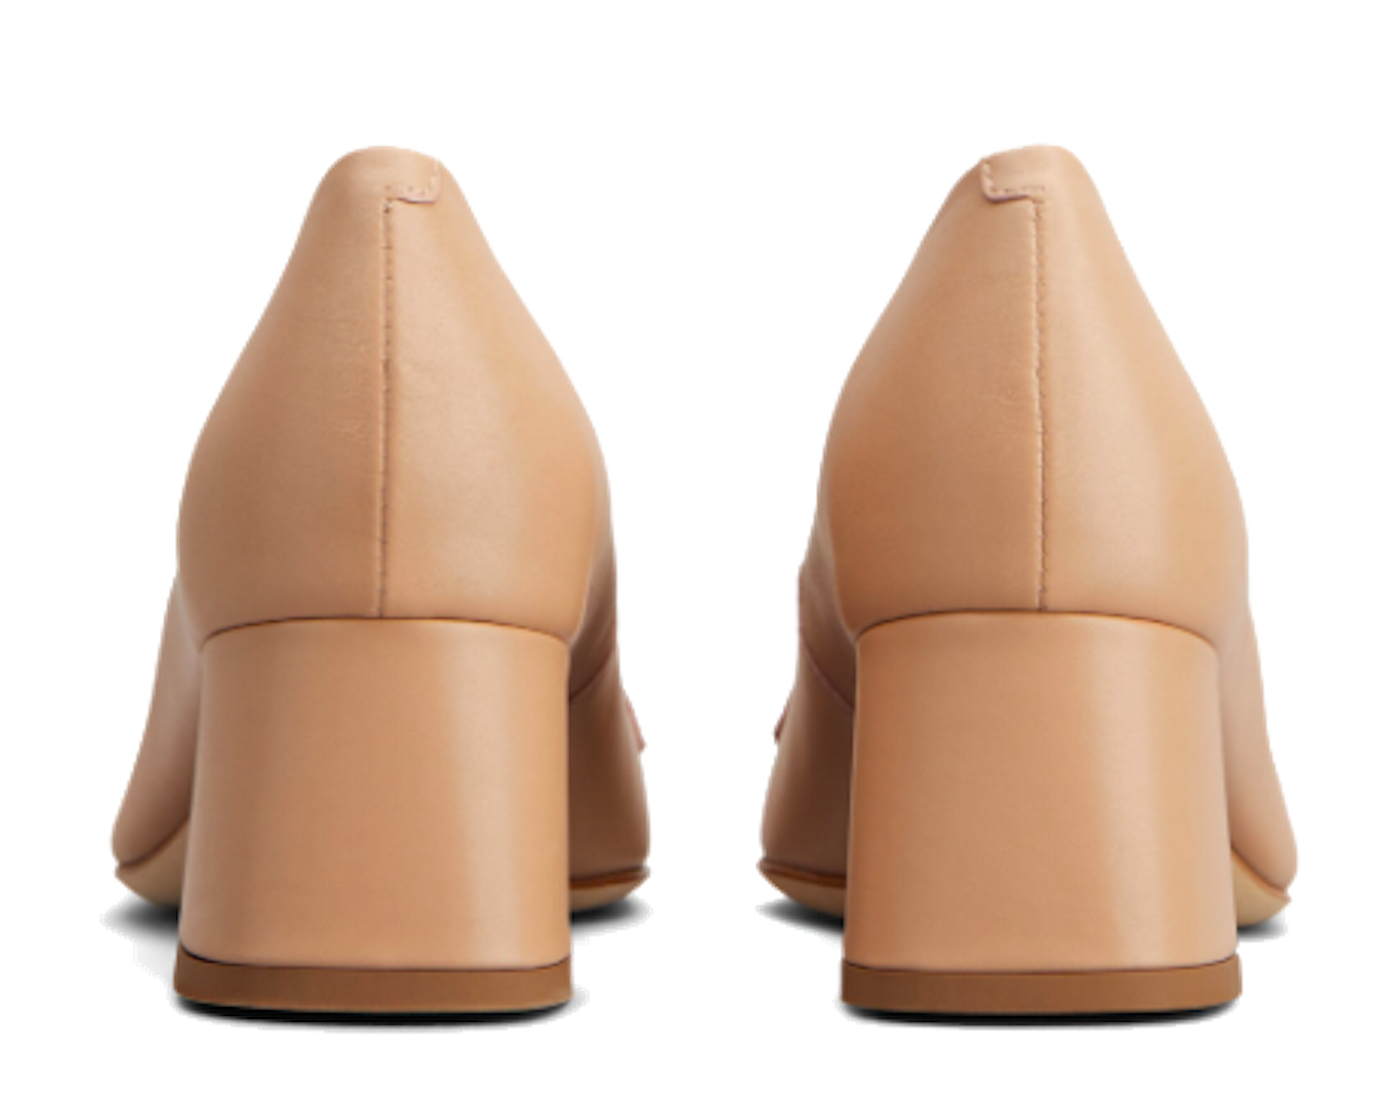 TODS KATE PUMP NUDE